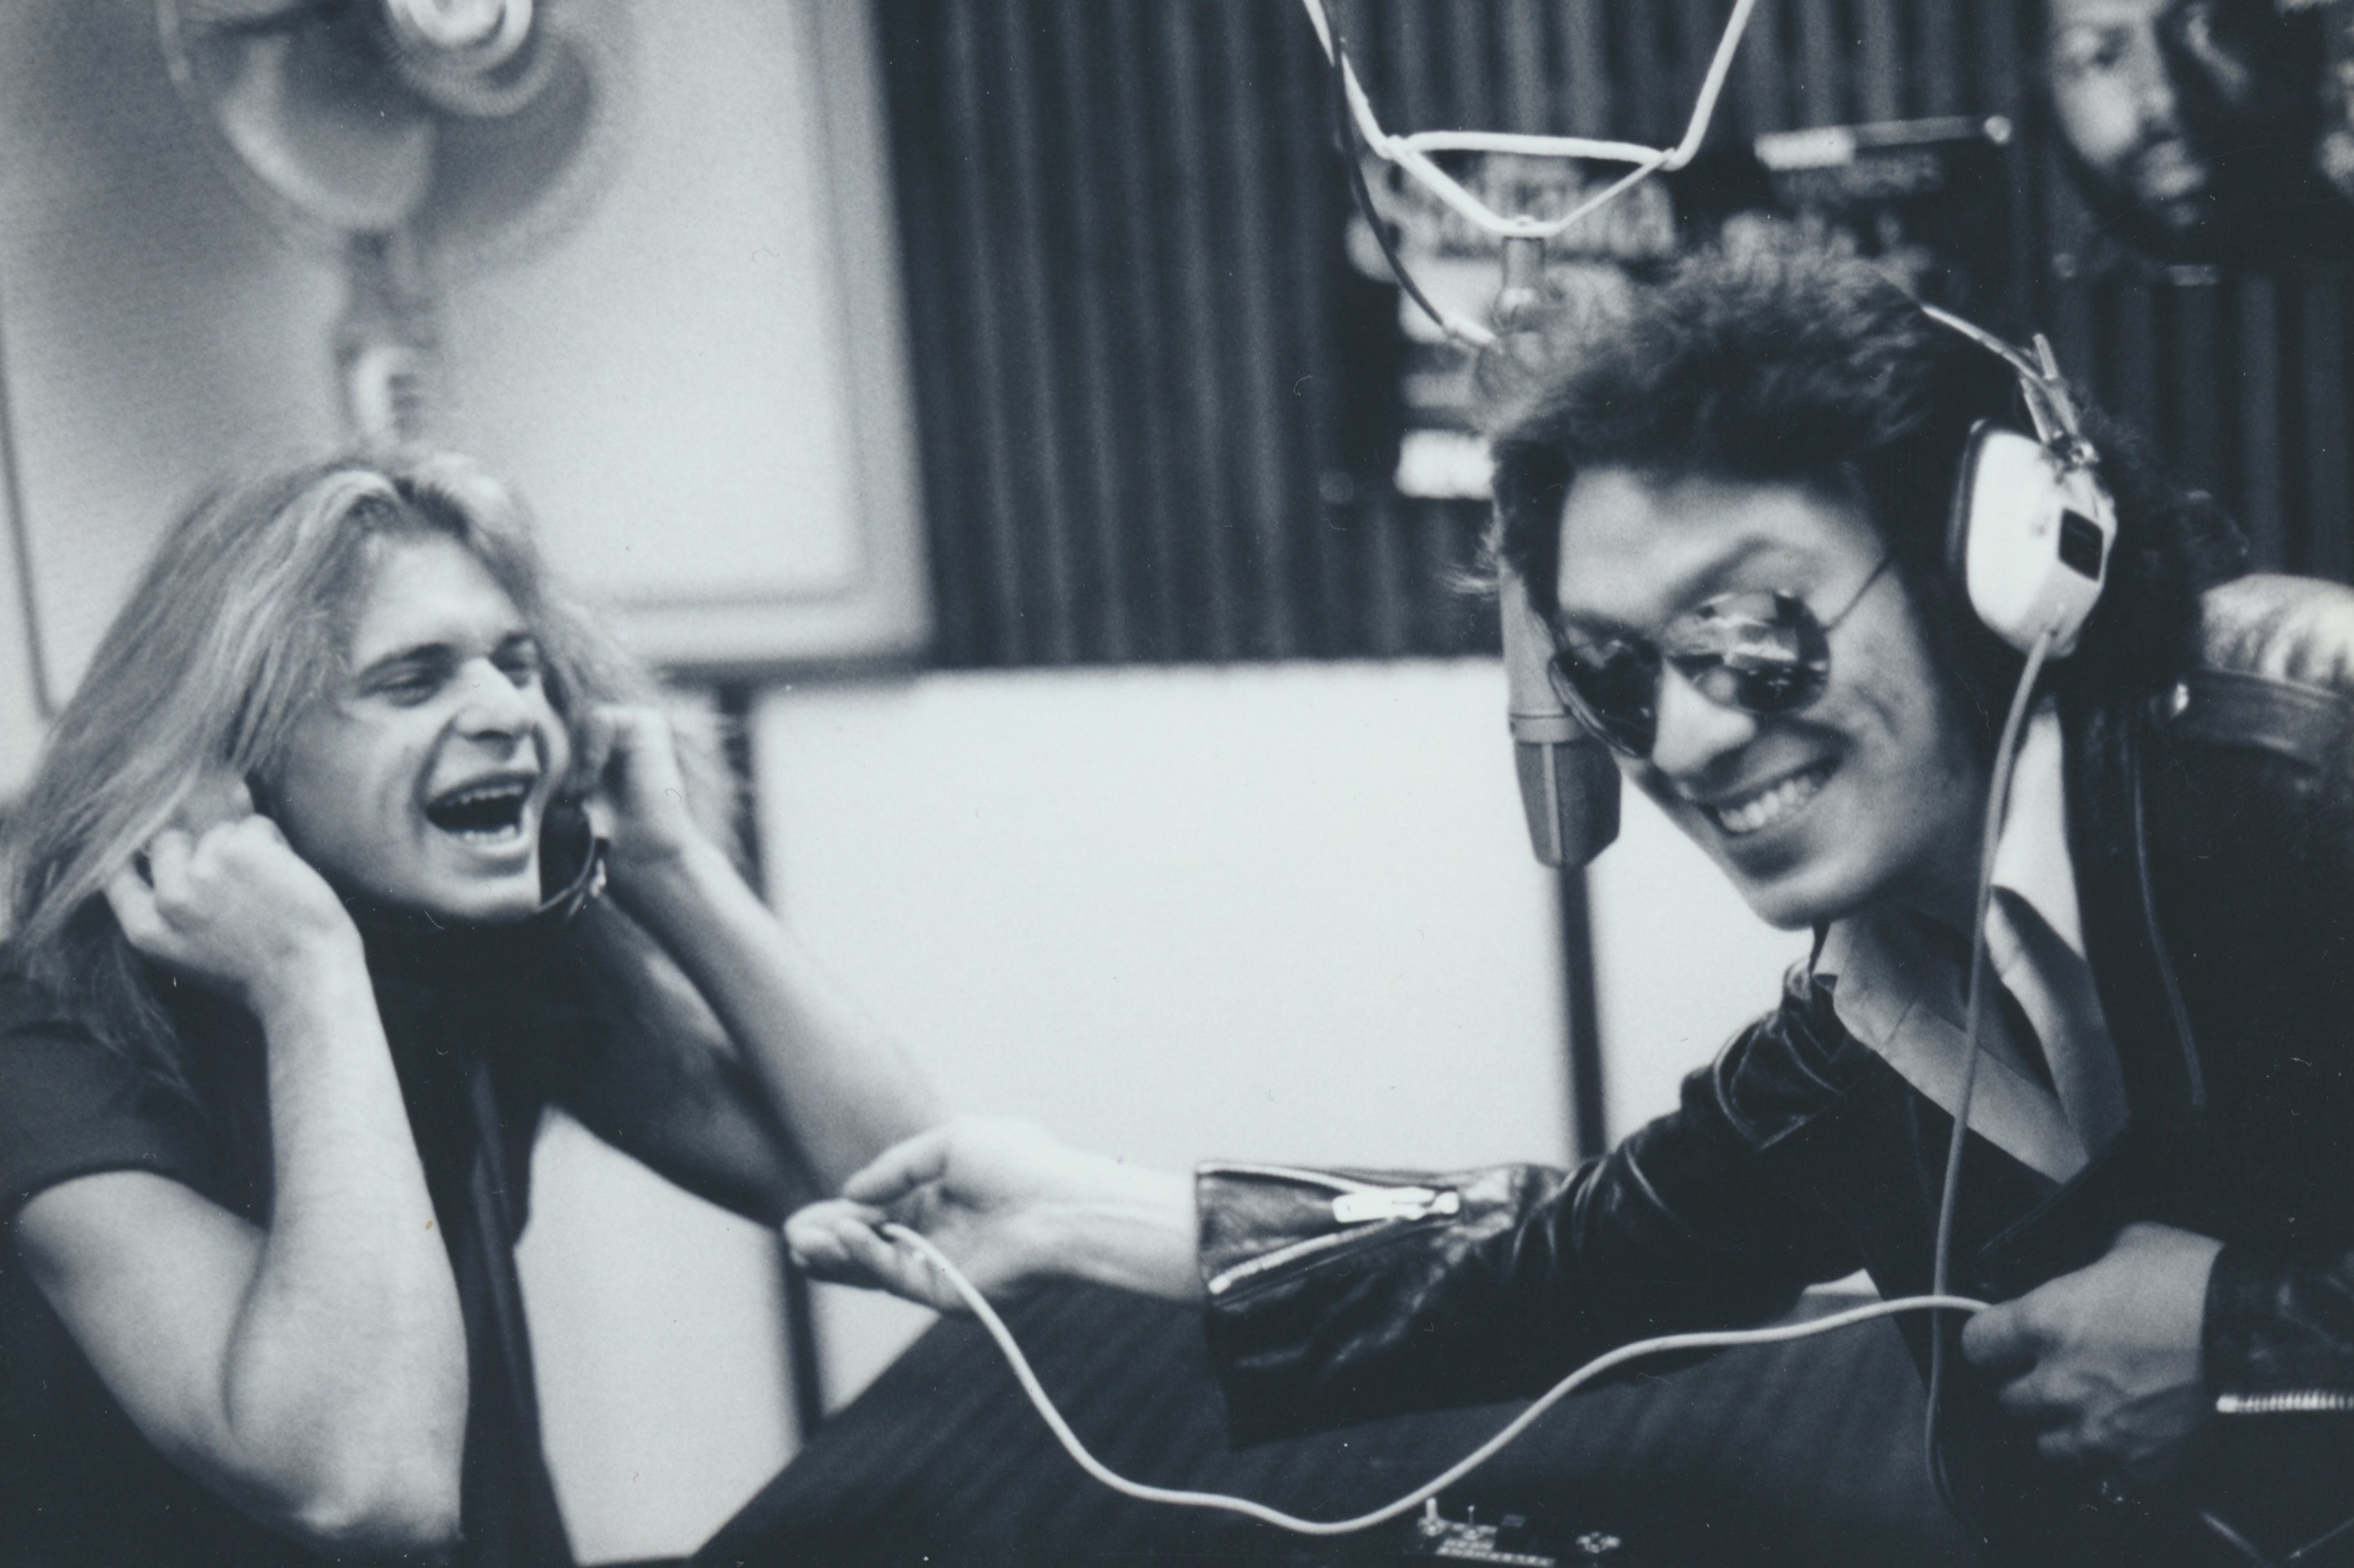 David Lee Roth and Alex in the studio